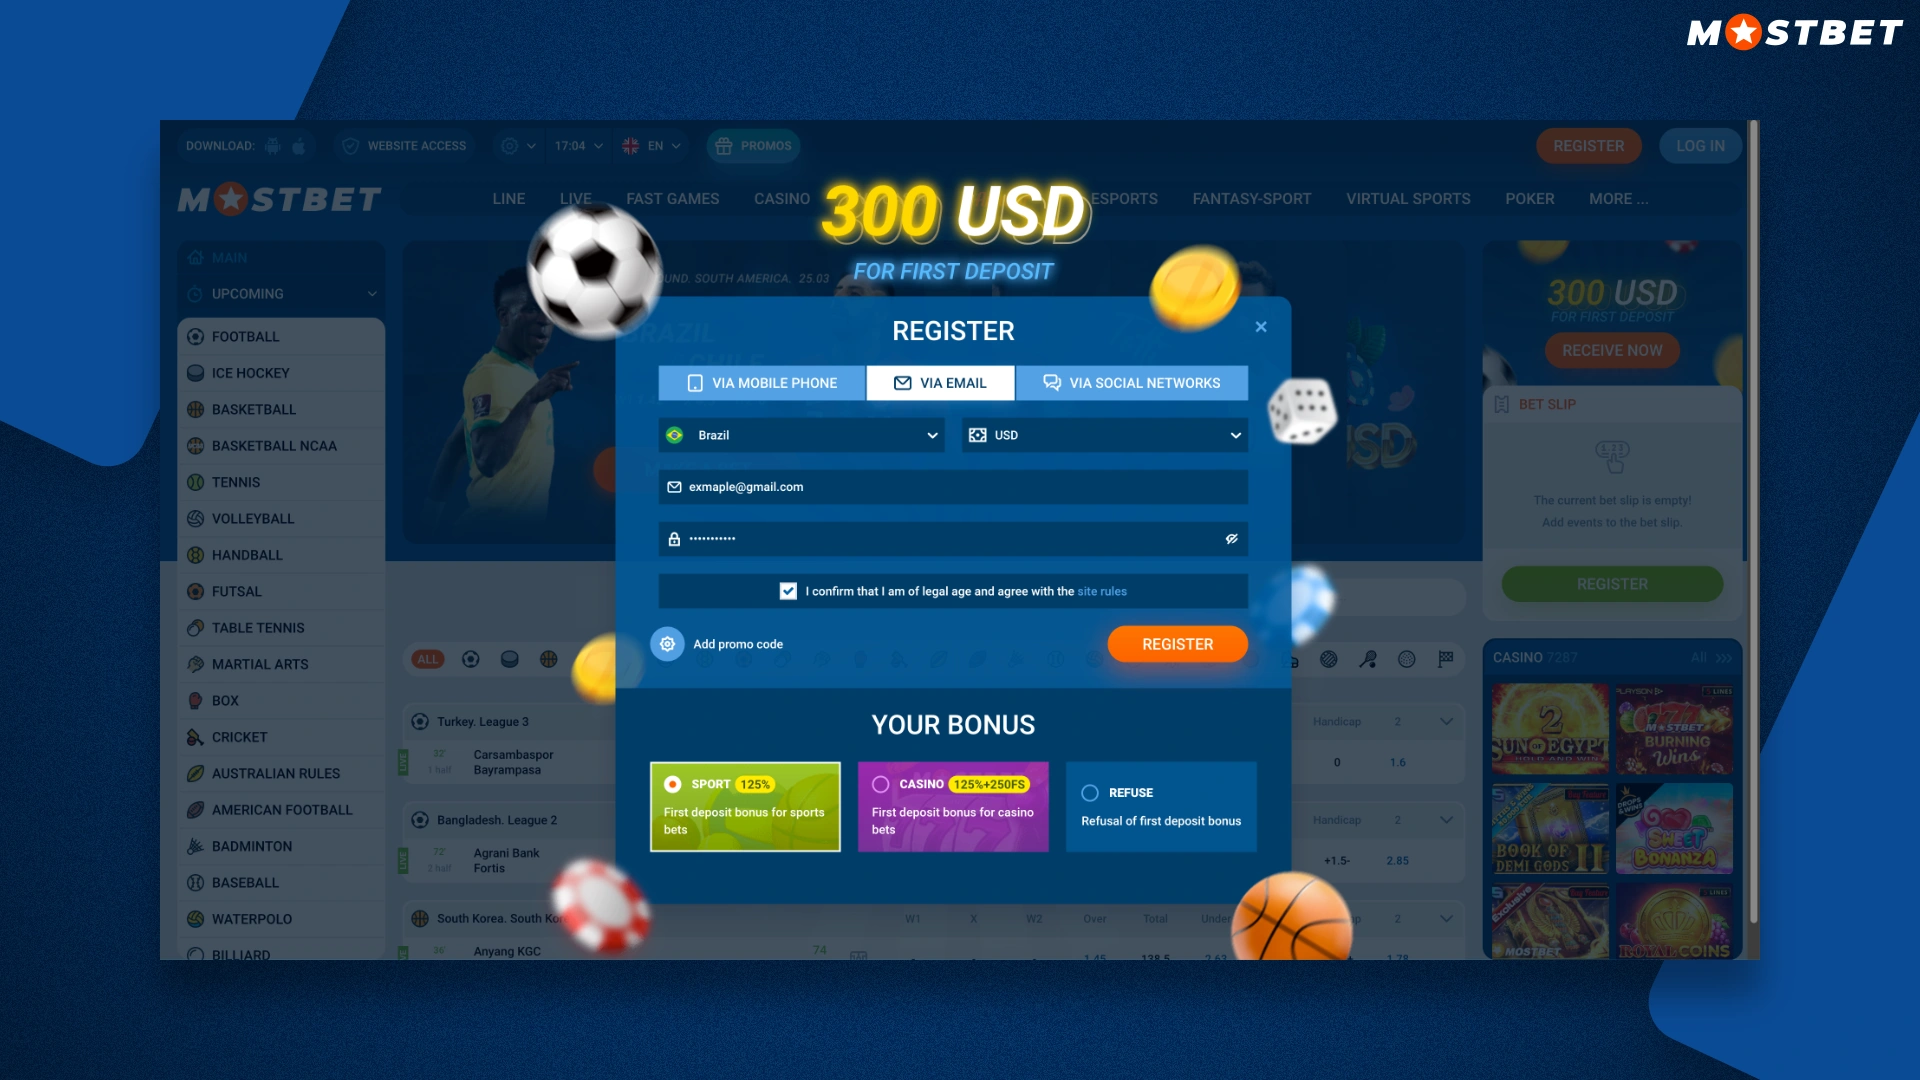 A step-by-step guide on how to create an account on the Mostbet website